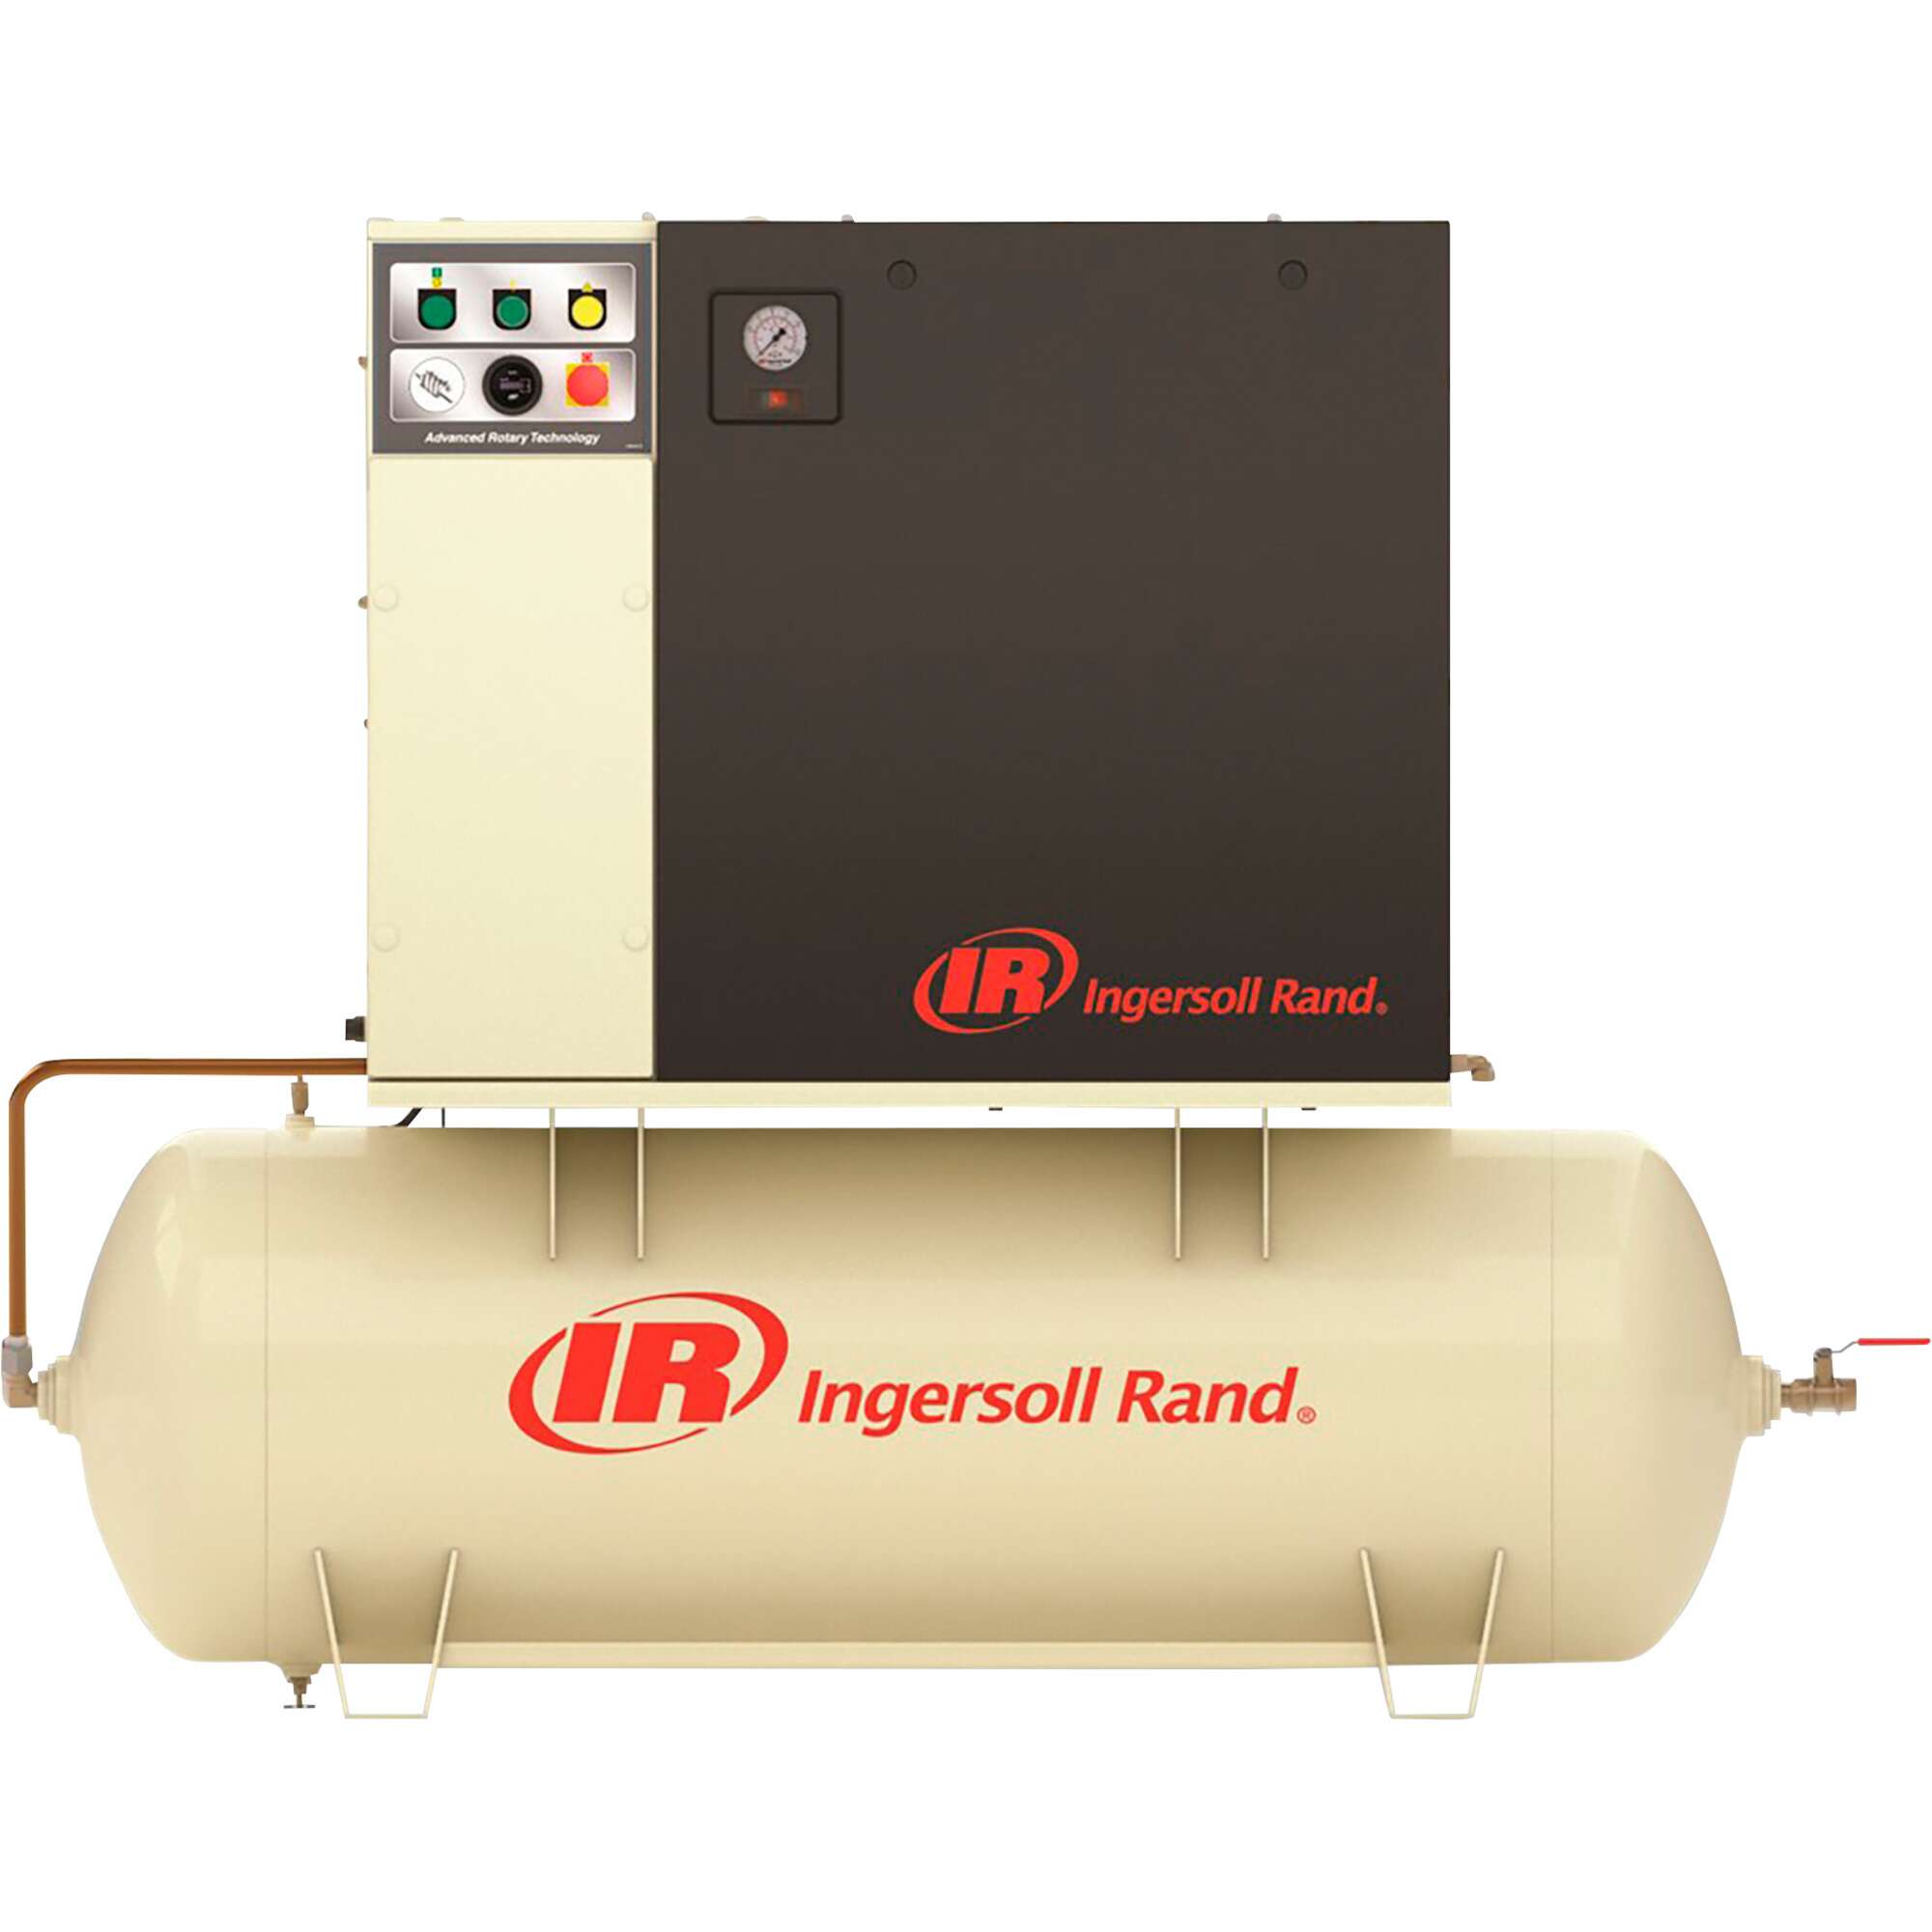 Ingersoll Rand Rotary Screw Compressor 200 Volts 3 Phase 7.5 HP 28 CFM